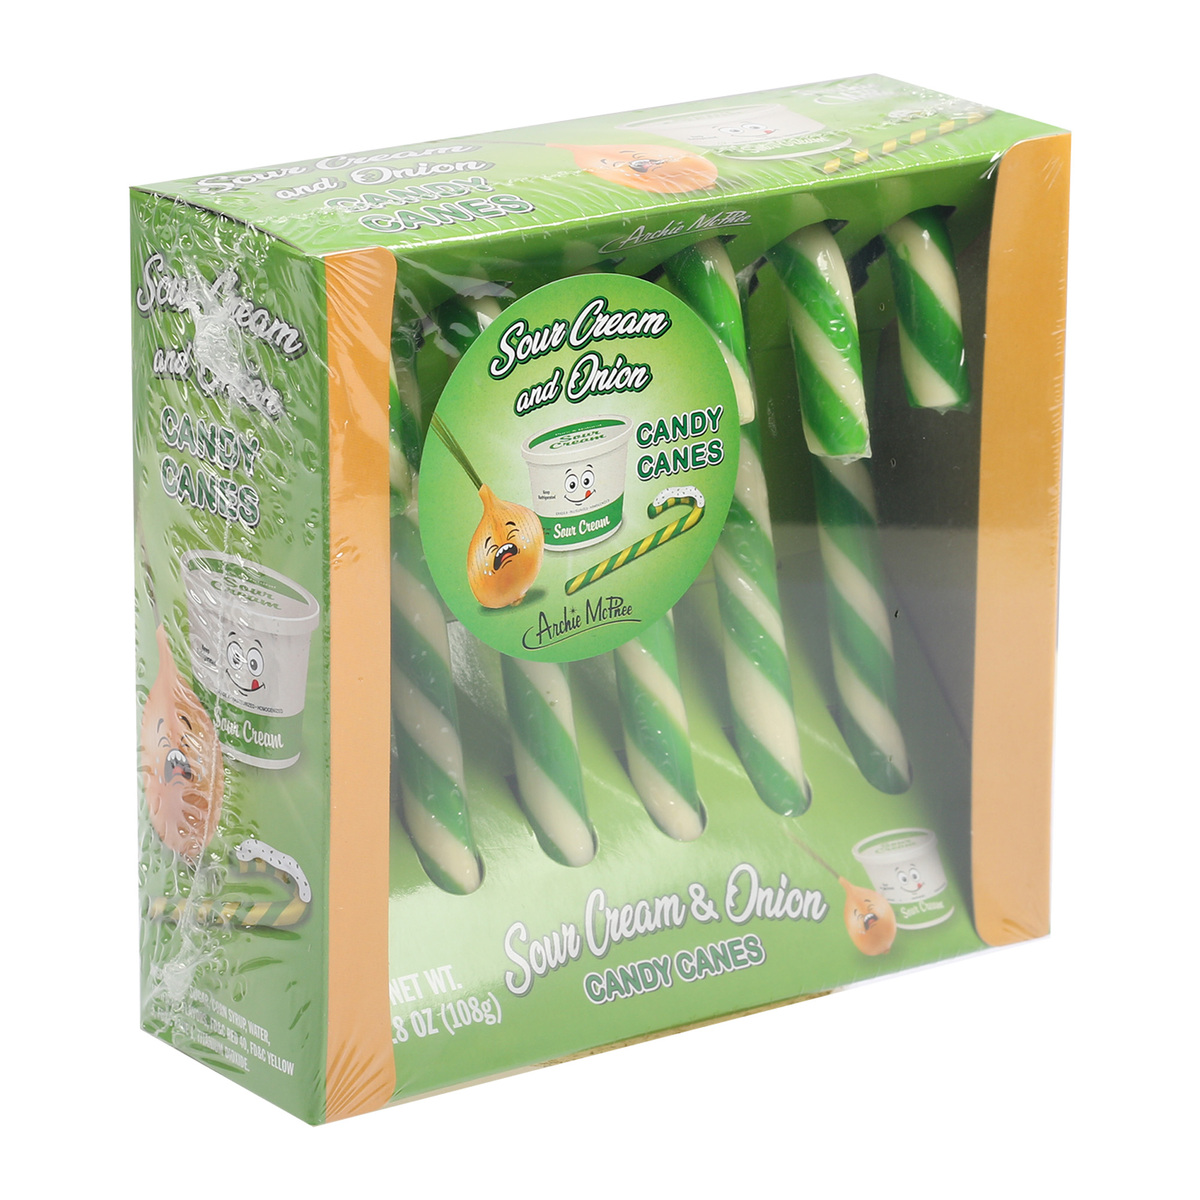 Archie McPhee Sour Cream & Onion Candy Canes 108 g